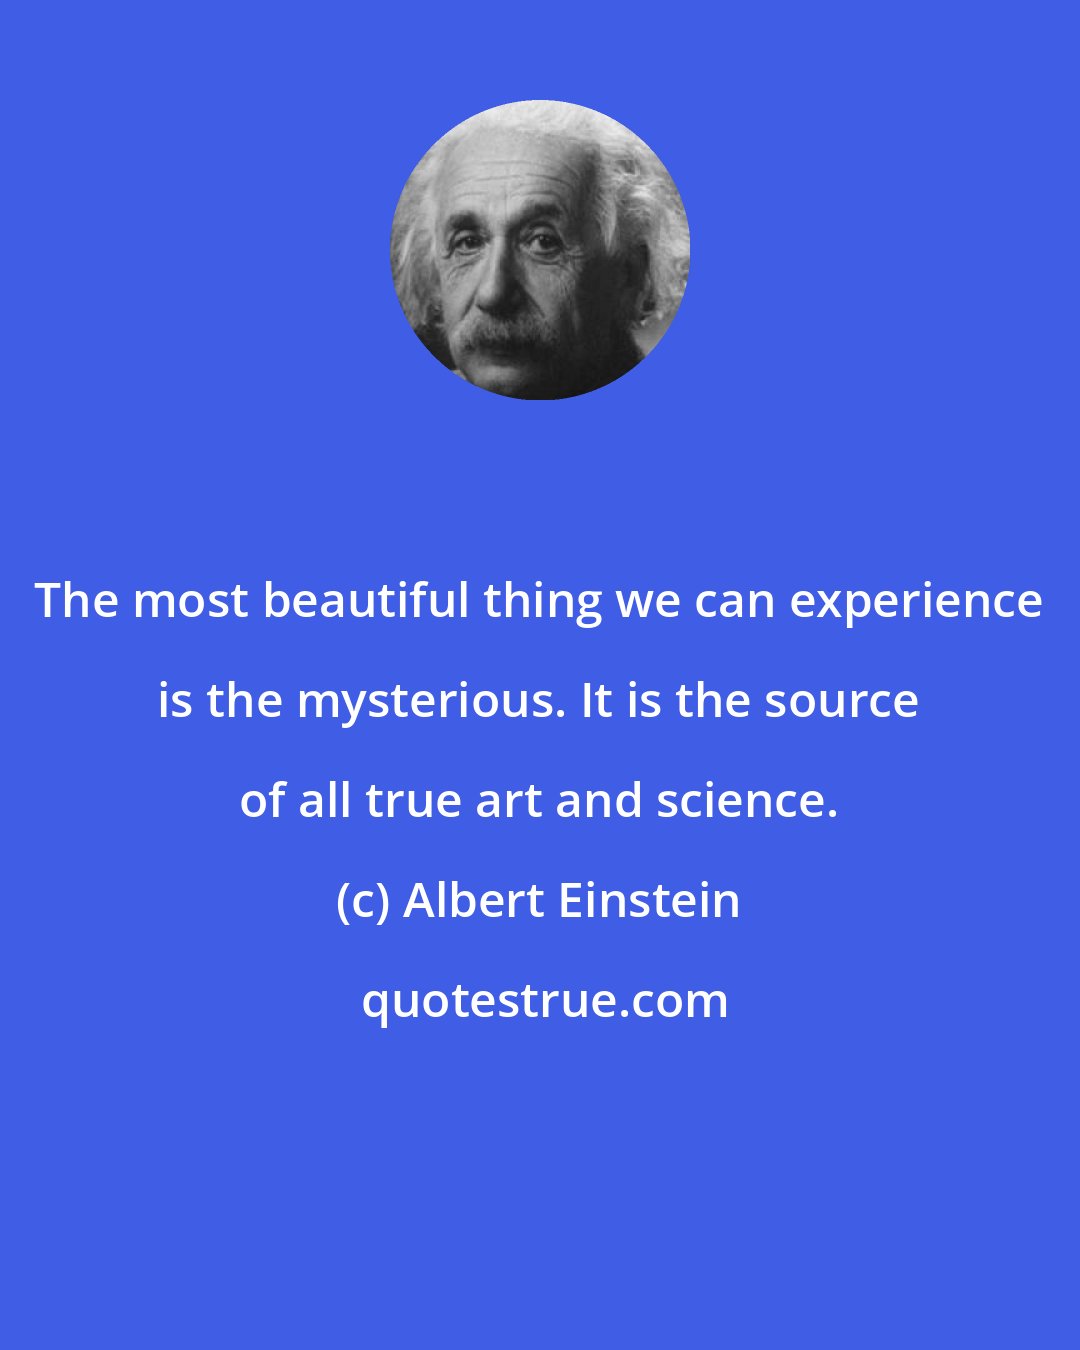 Albert Einstein: The most beautiful thing we can experience is the mysterious. It is the source of all true art and science.